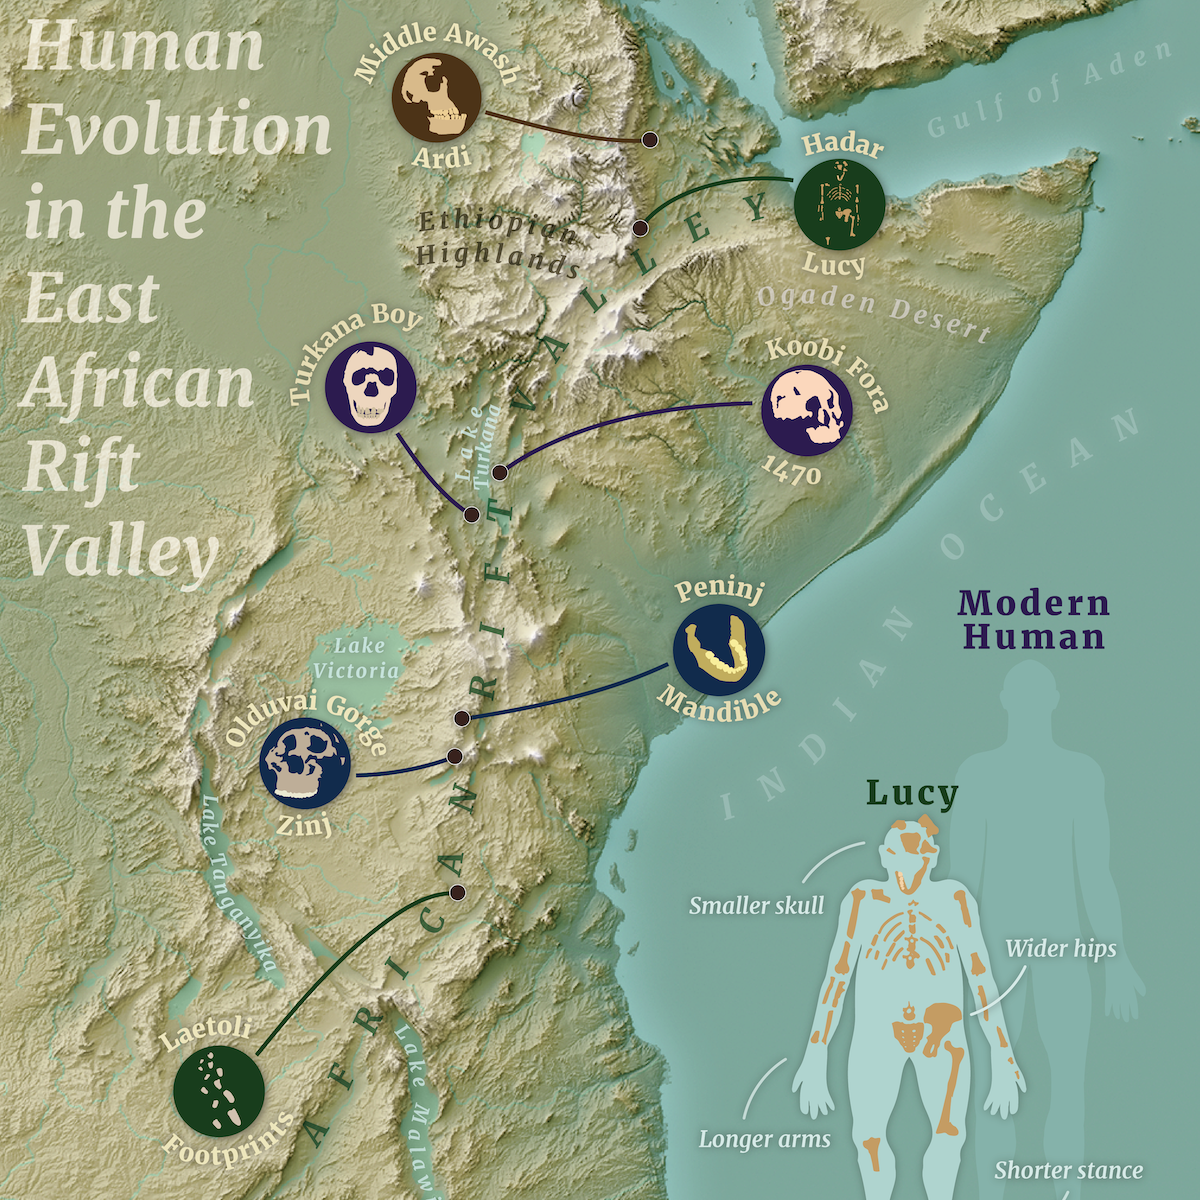 Human Evolution in the East African Rift Valley